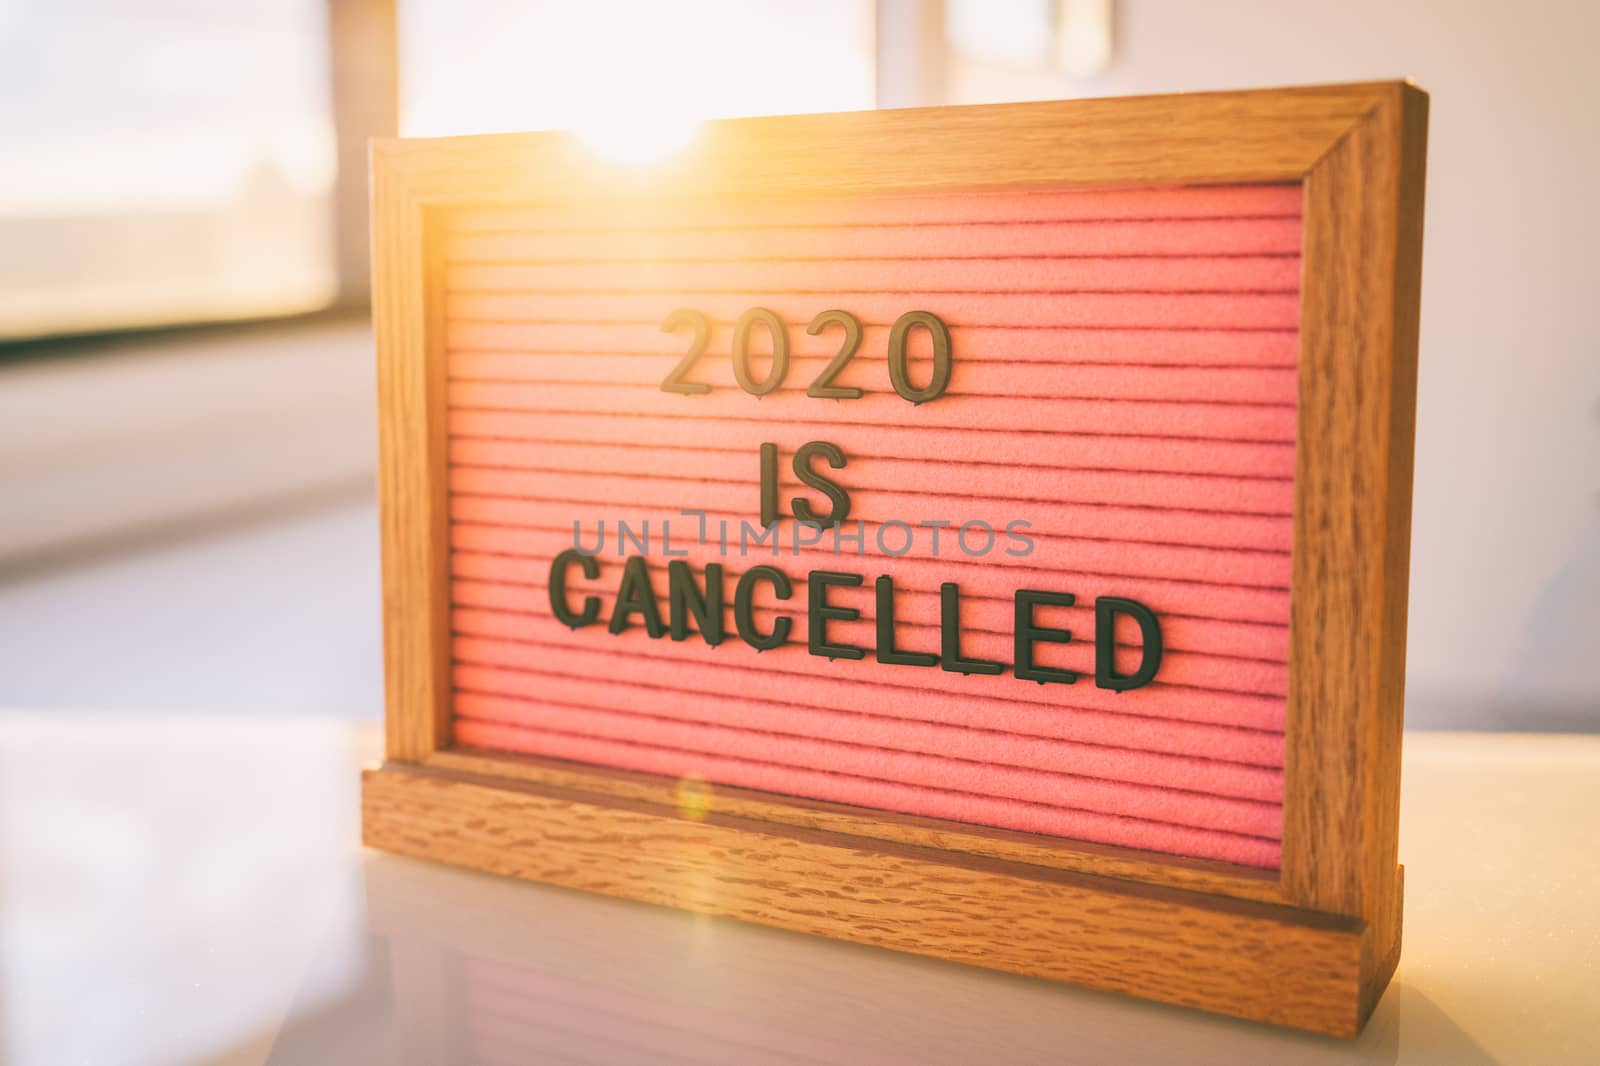 COVID-19 Funny Quote on pink felt sign board: 2020 IS CANCELLED message at home by Maridav